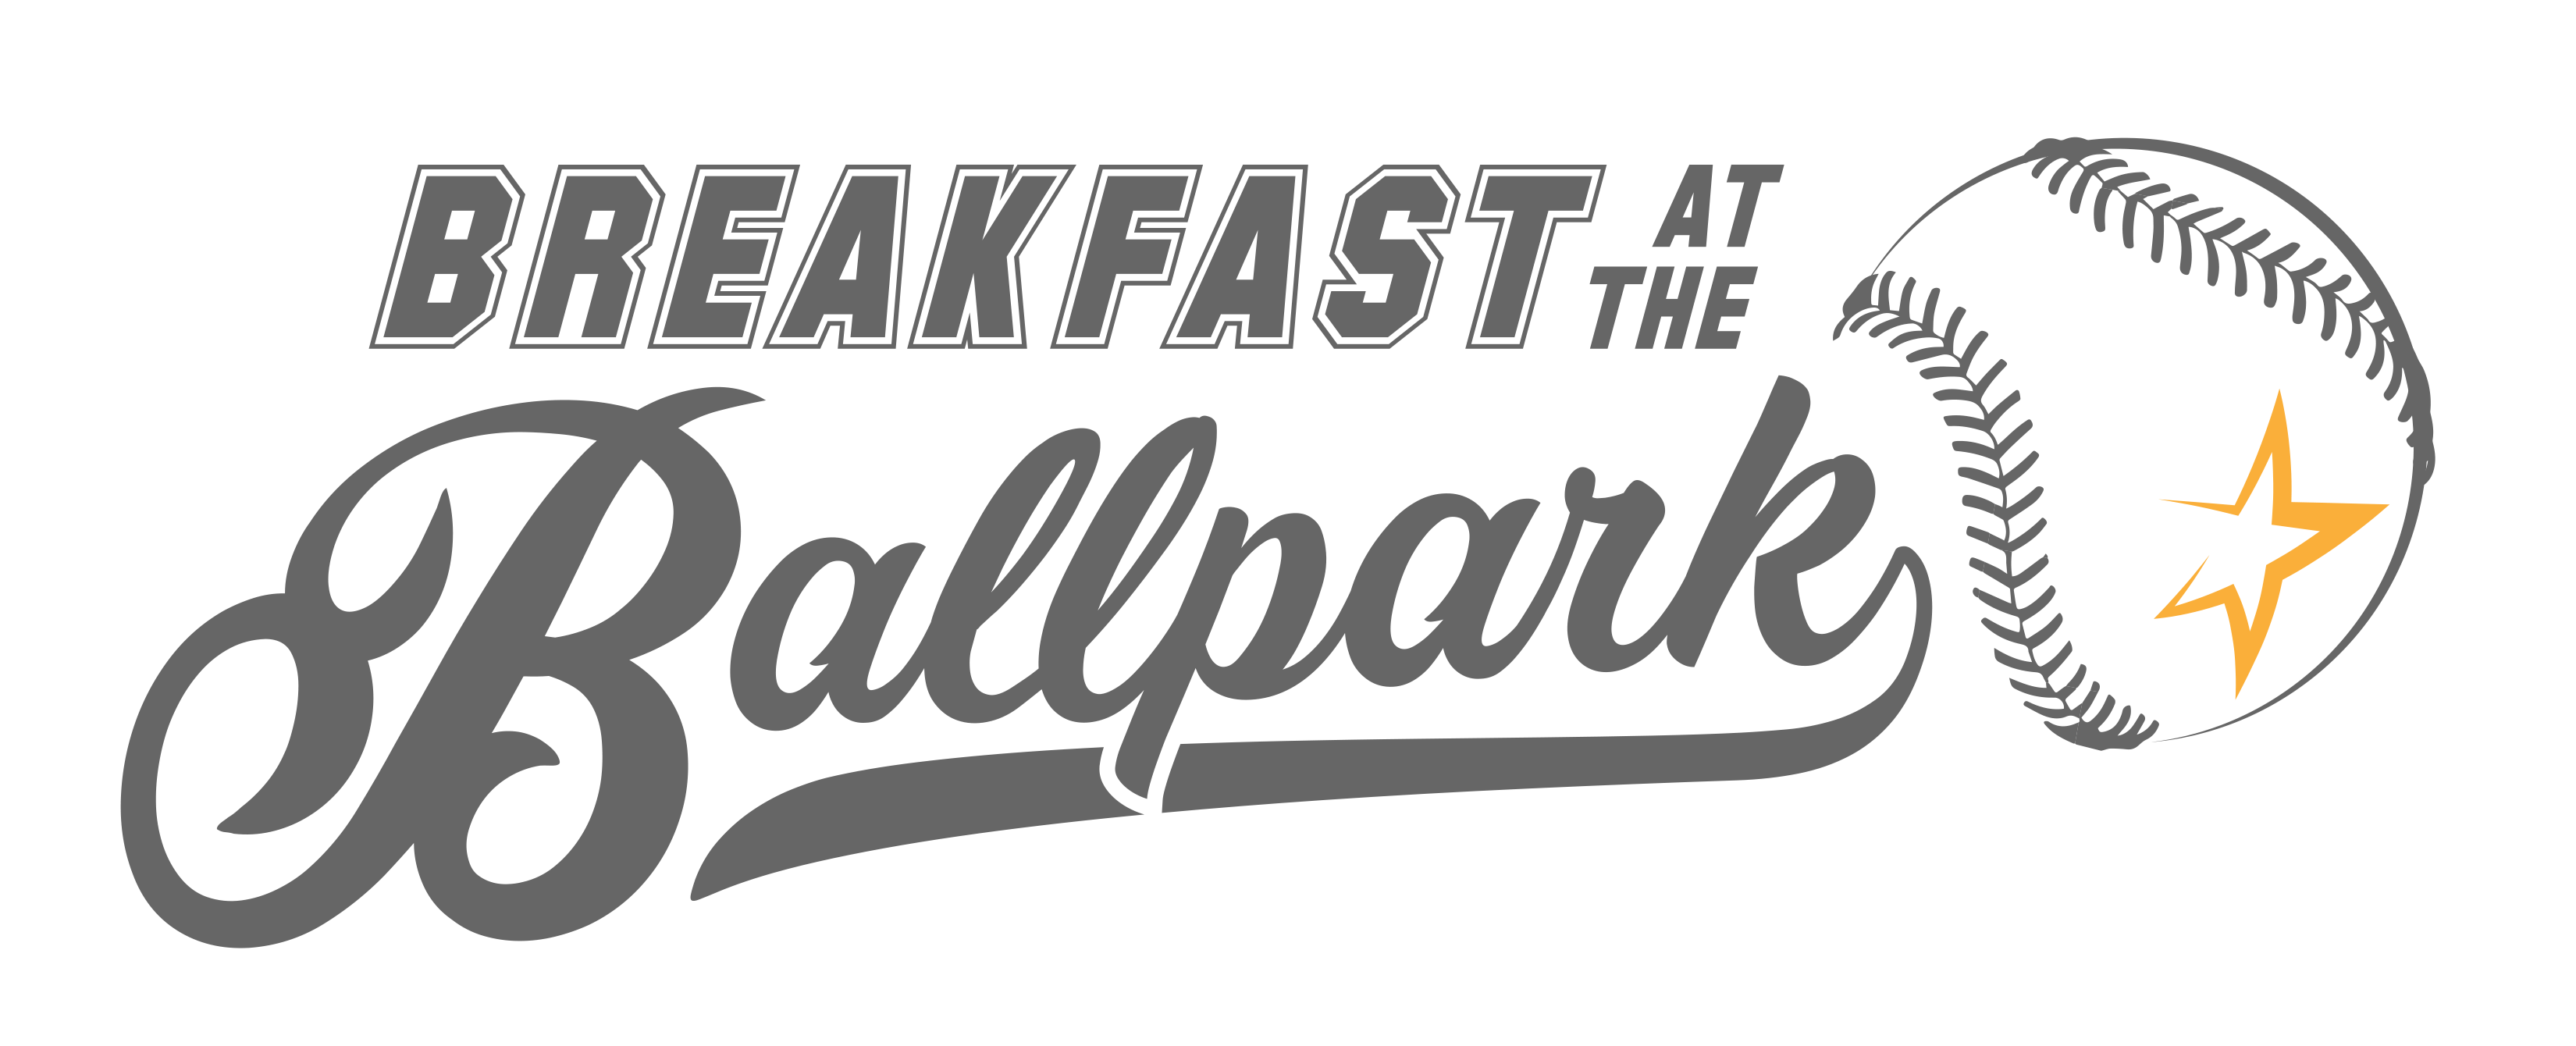 Breakfast at the Ballpark by CFY Pinellas